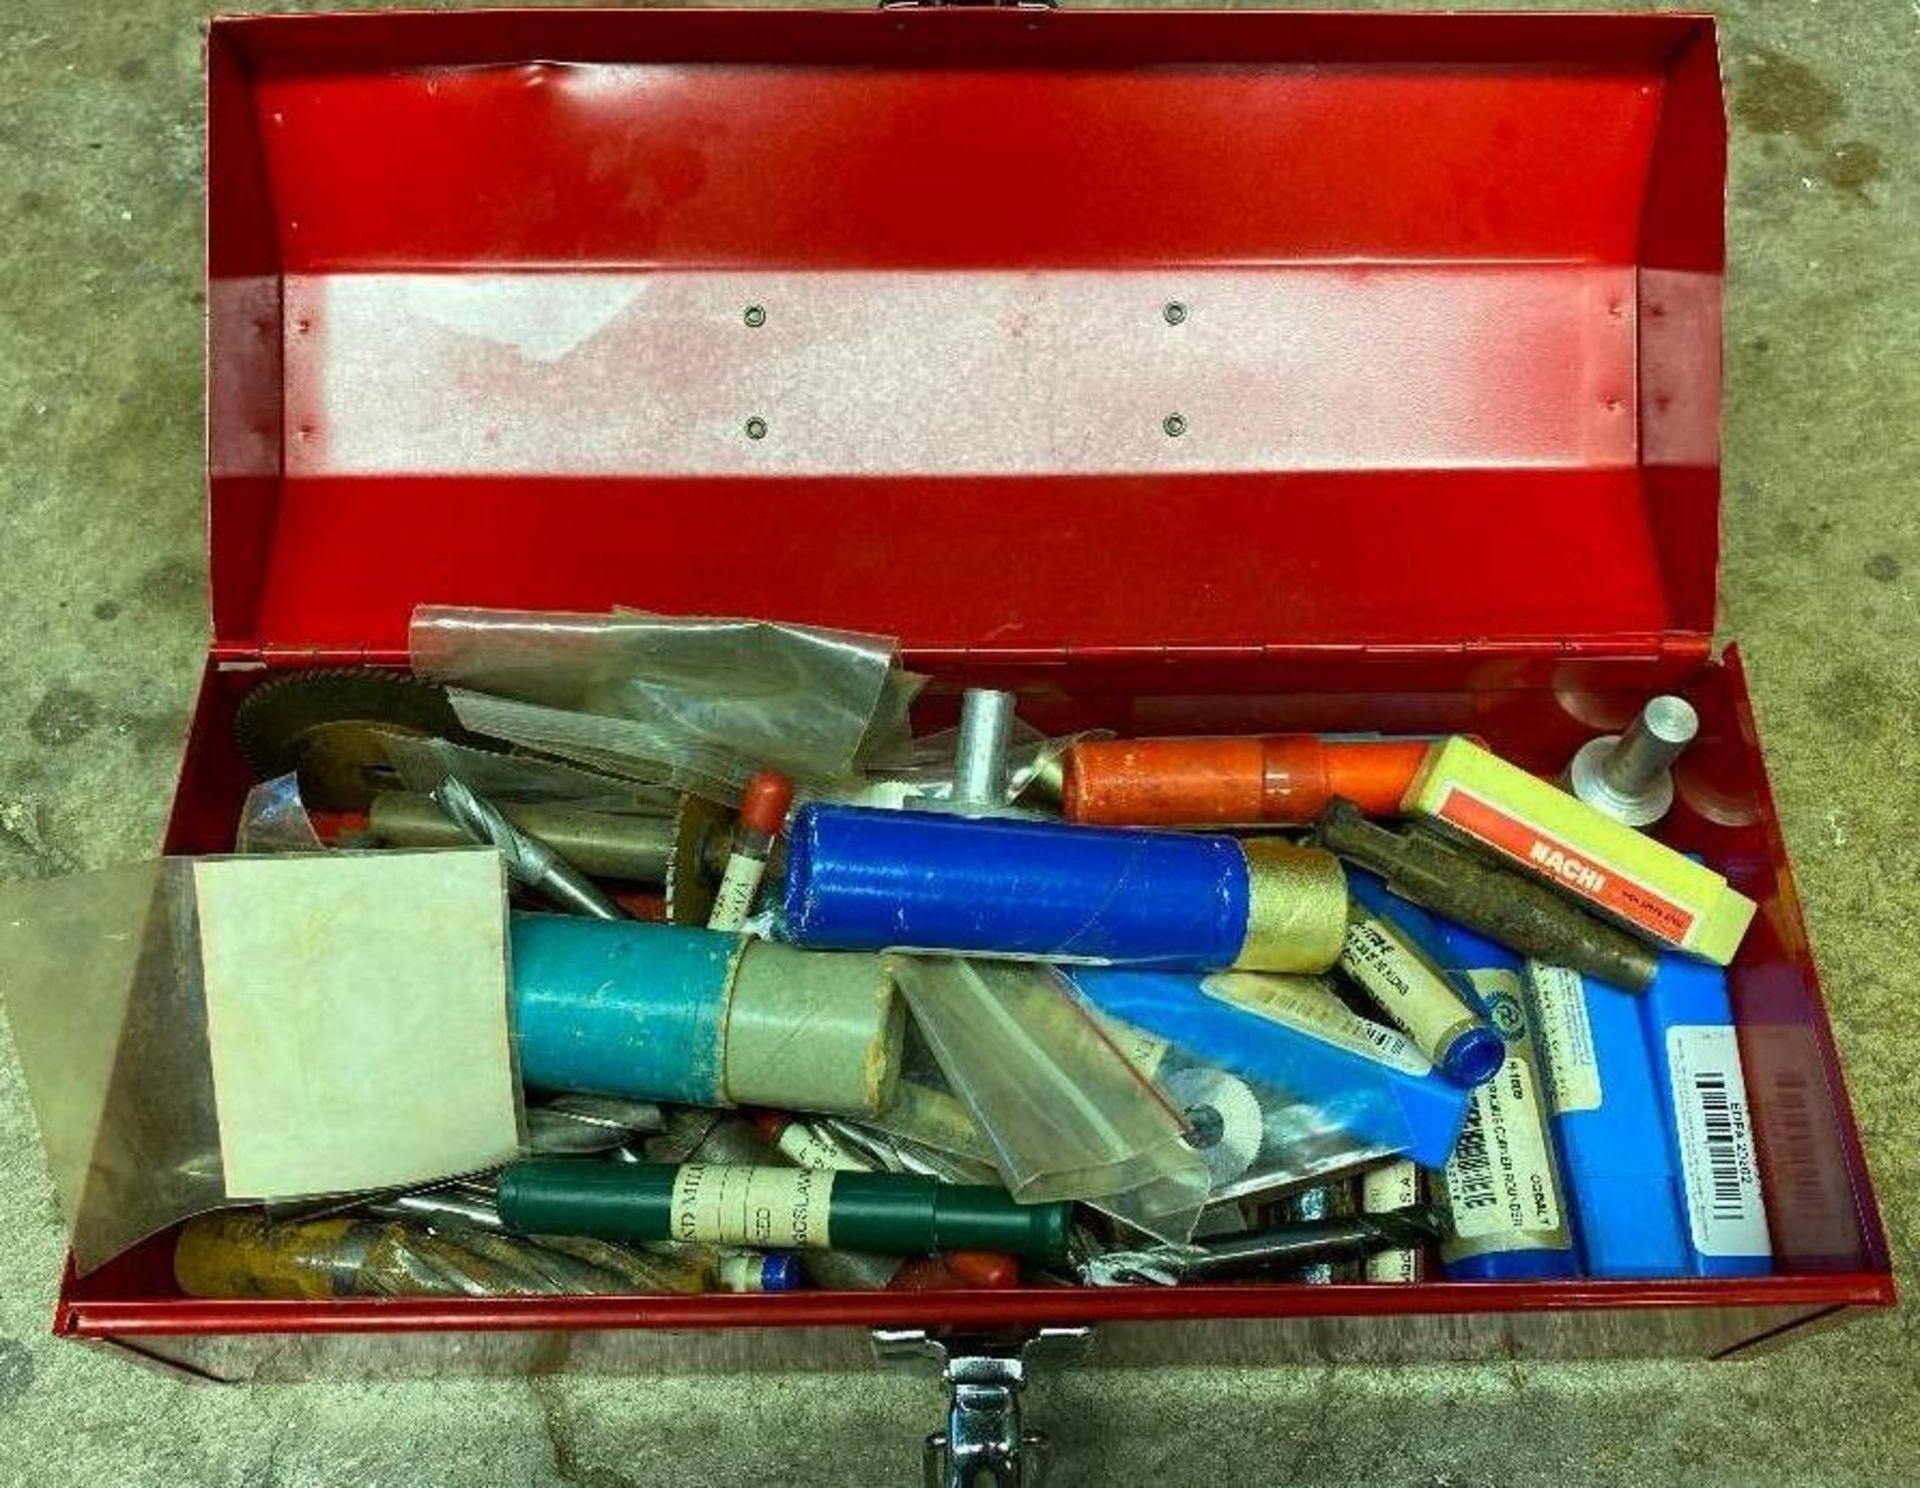 DESCRIPTION METAL TOOL BOX W/ ASSORTED TAP AND DIE LOCATION BASEMENT THIS LOT IS ONE MONEY QUANTITY